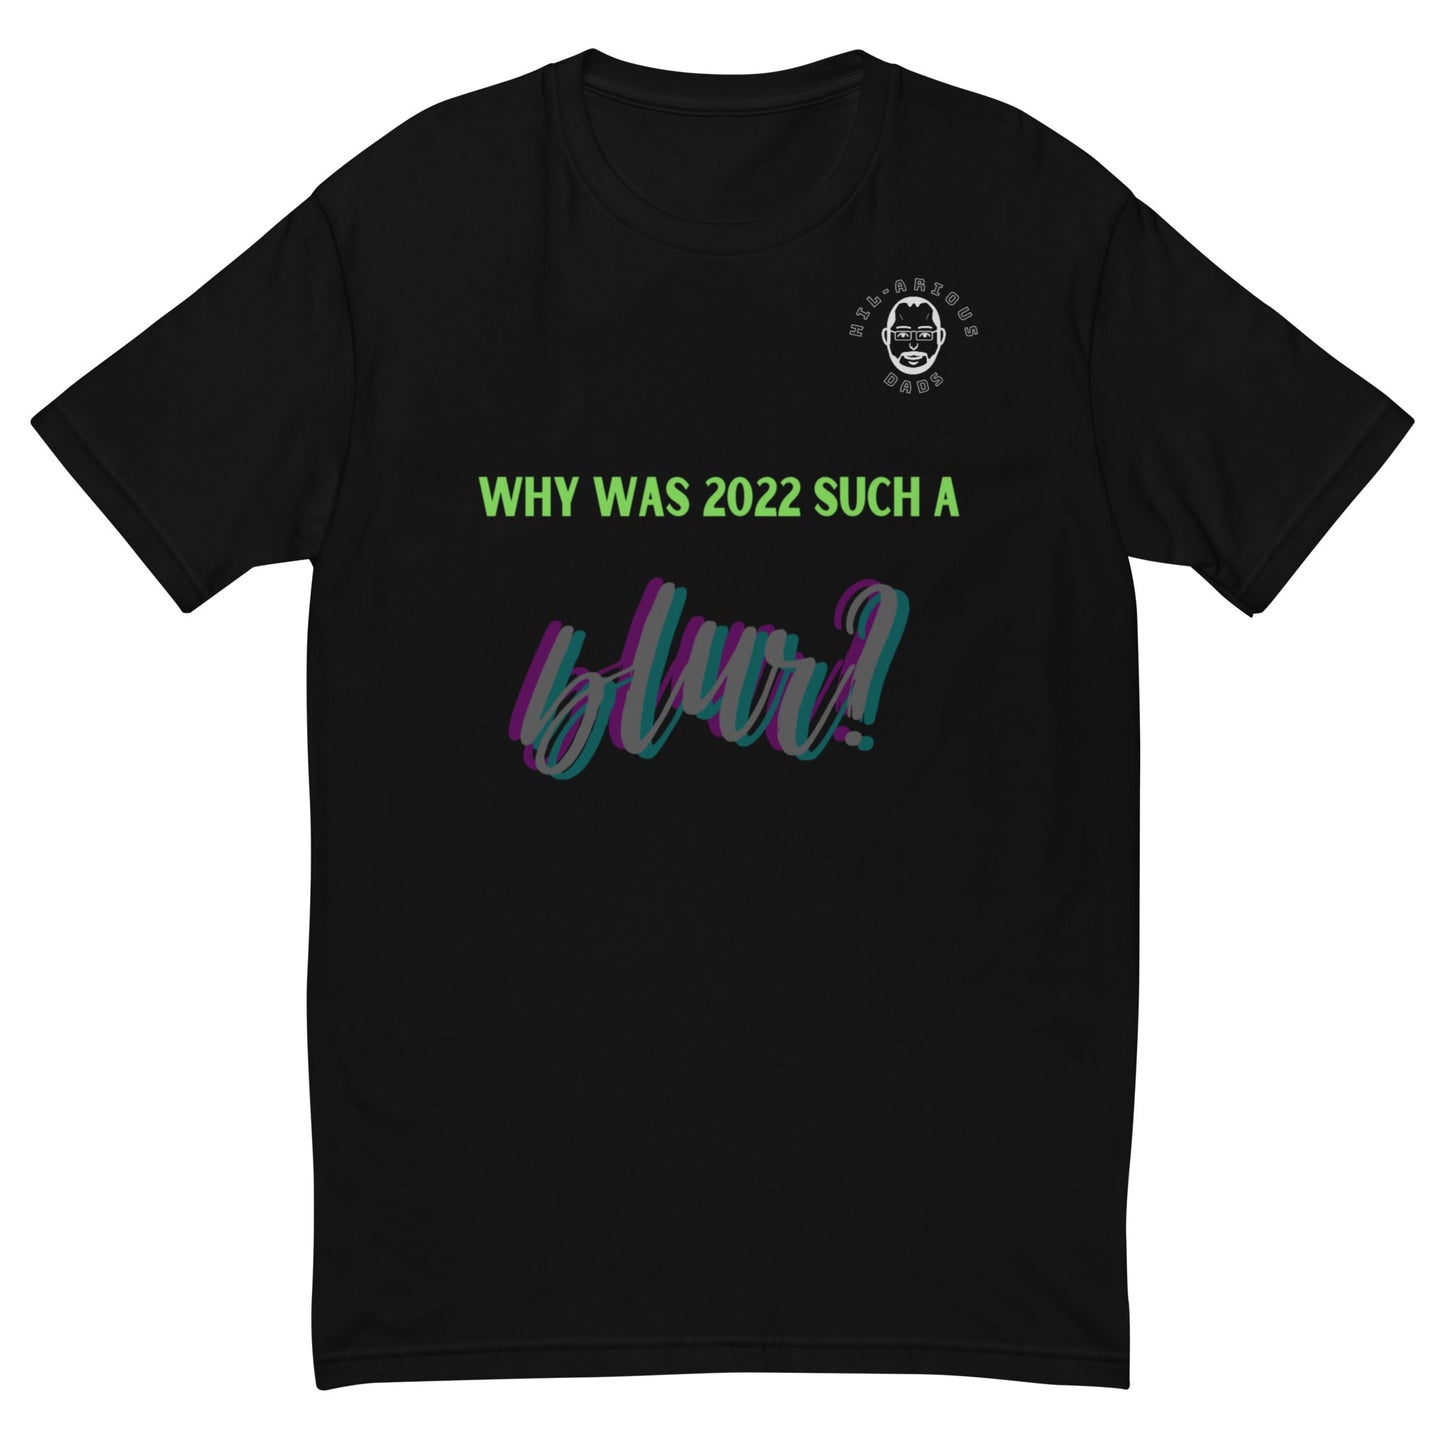 Why was 2022 such a blur?-T-shirt - Hil-arious Dads